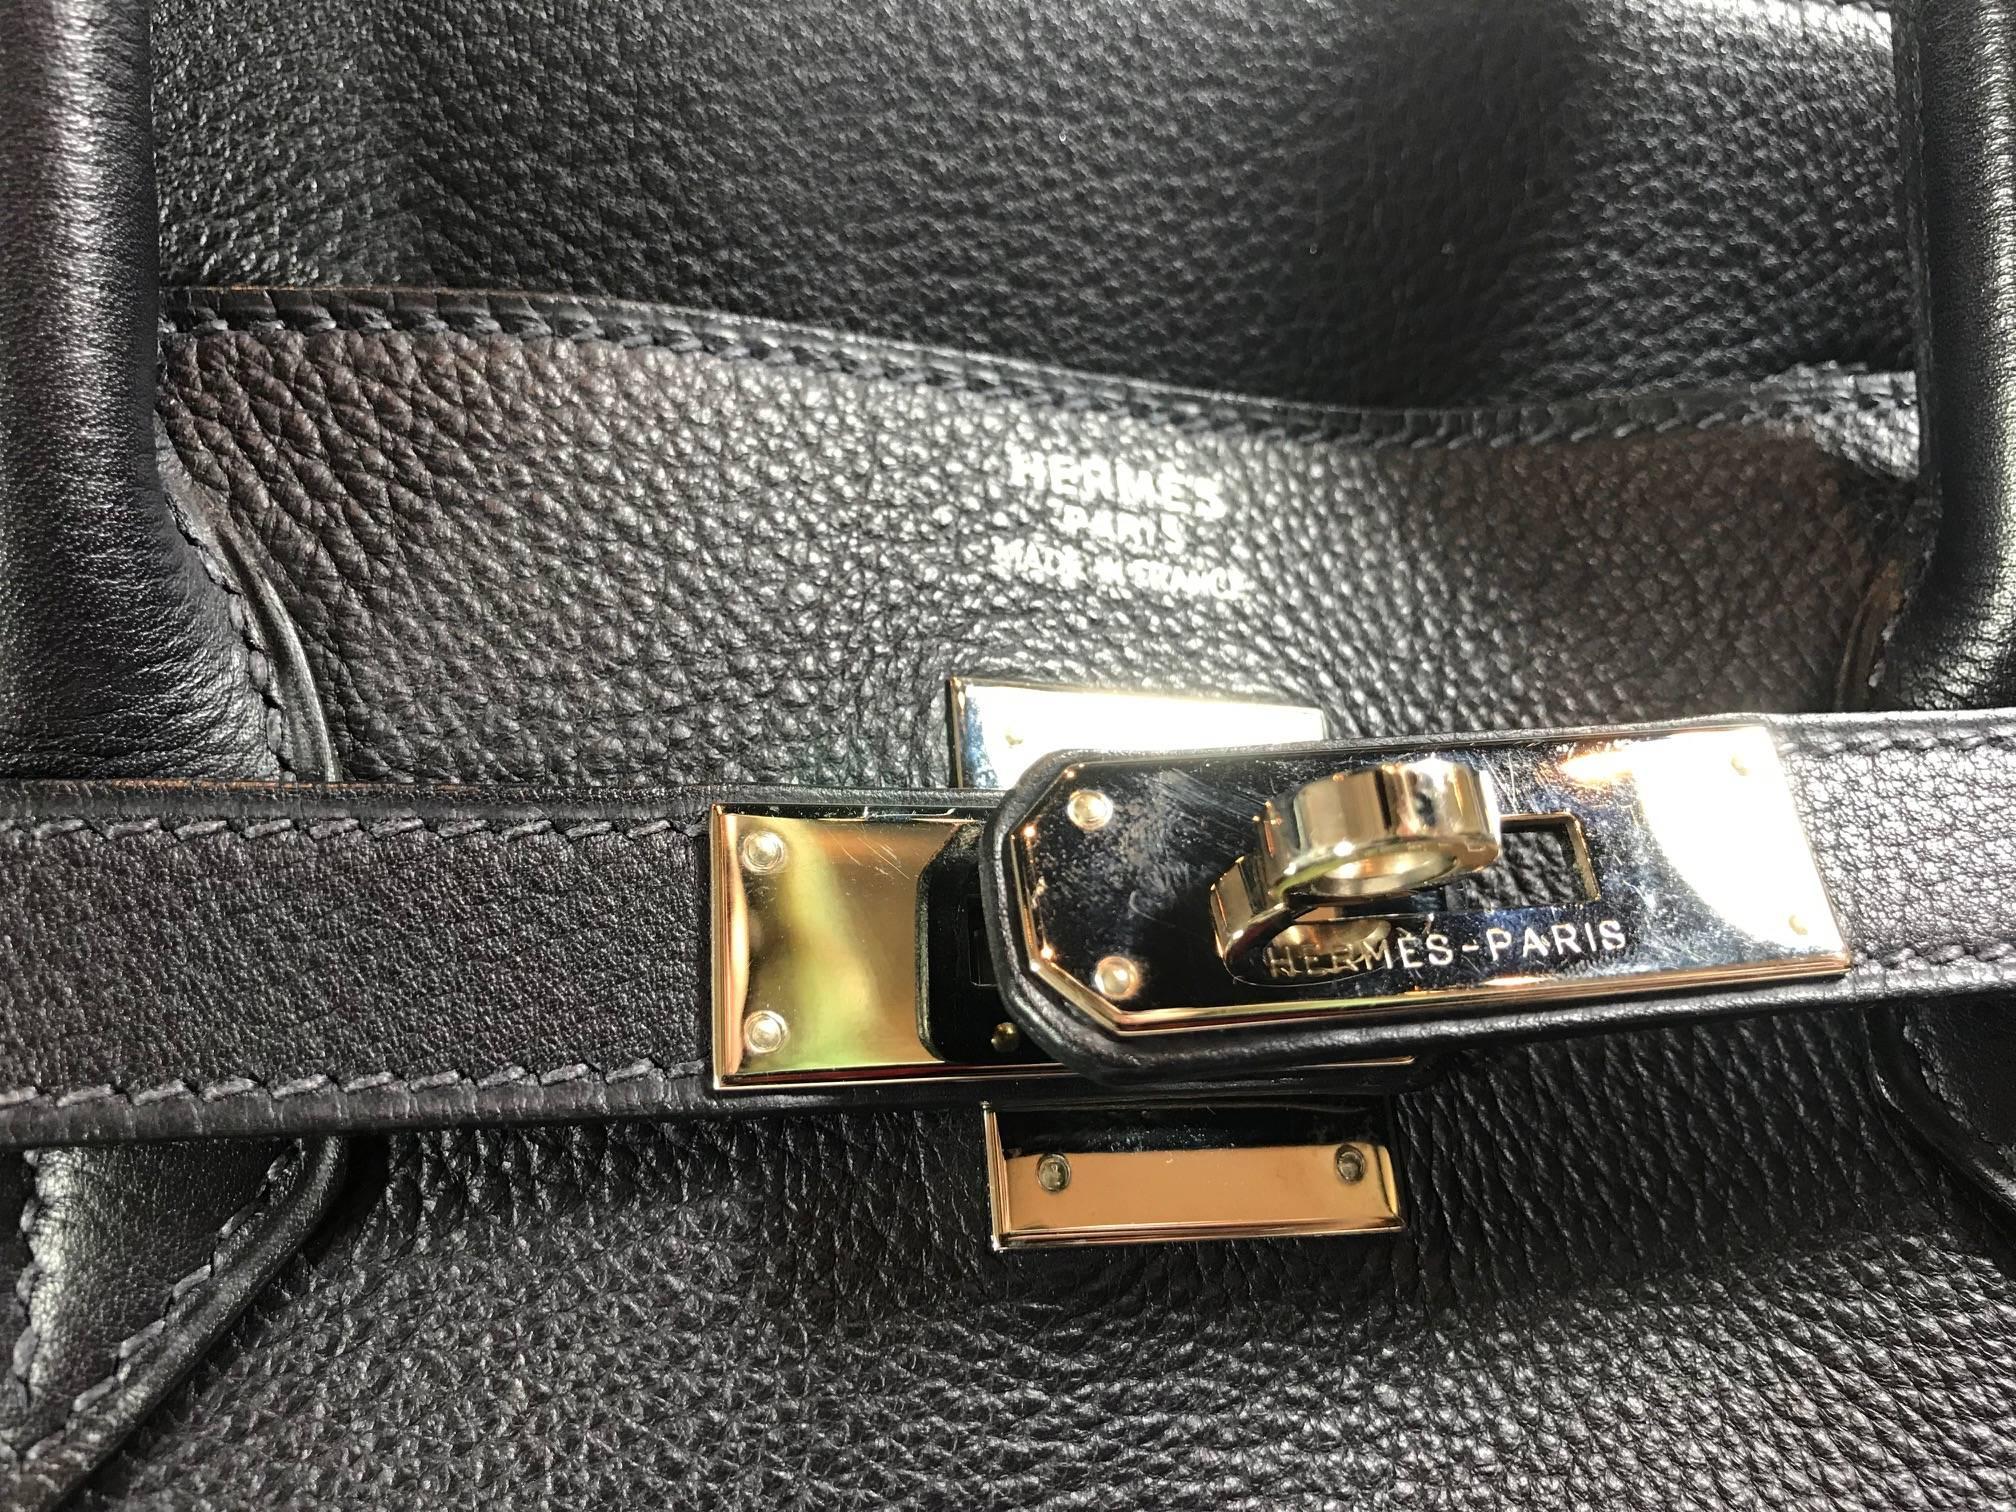 Hermès Birkin 40cm Navy Togo In Excellent Condition For Sale In Roslyn, NY